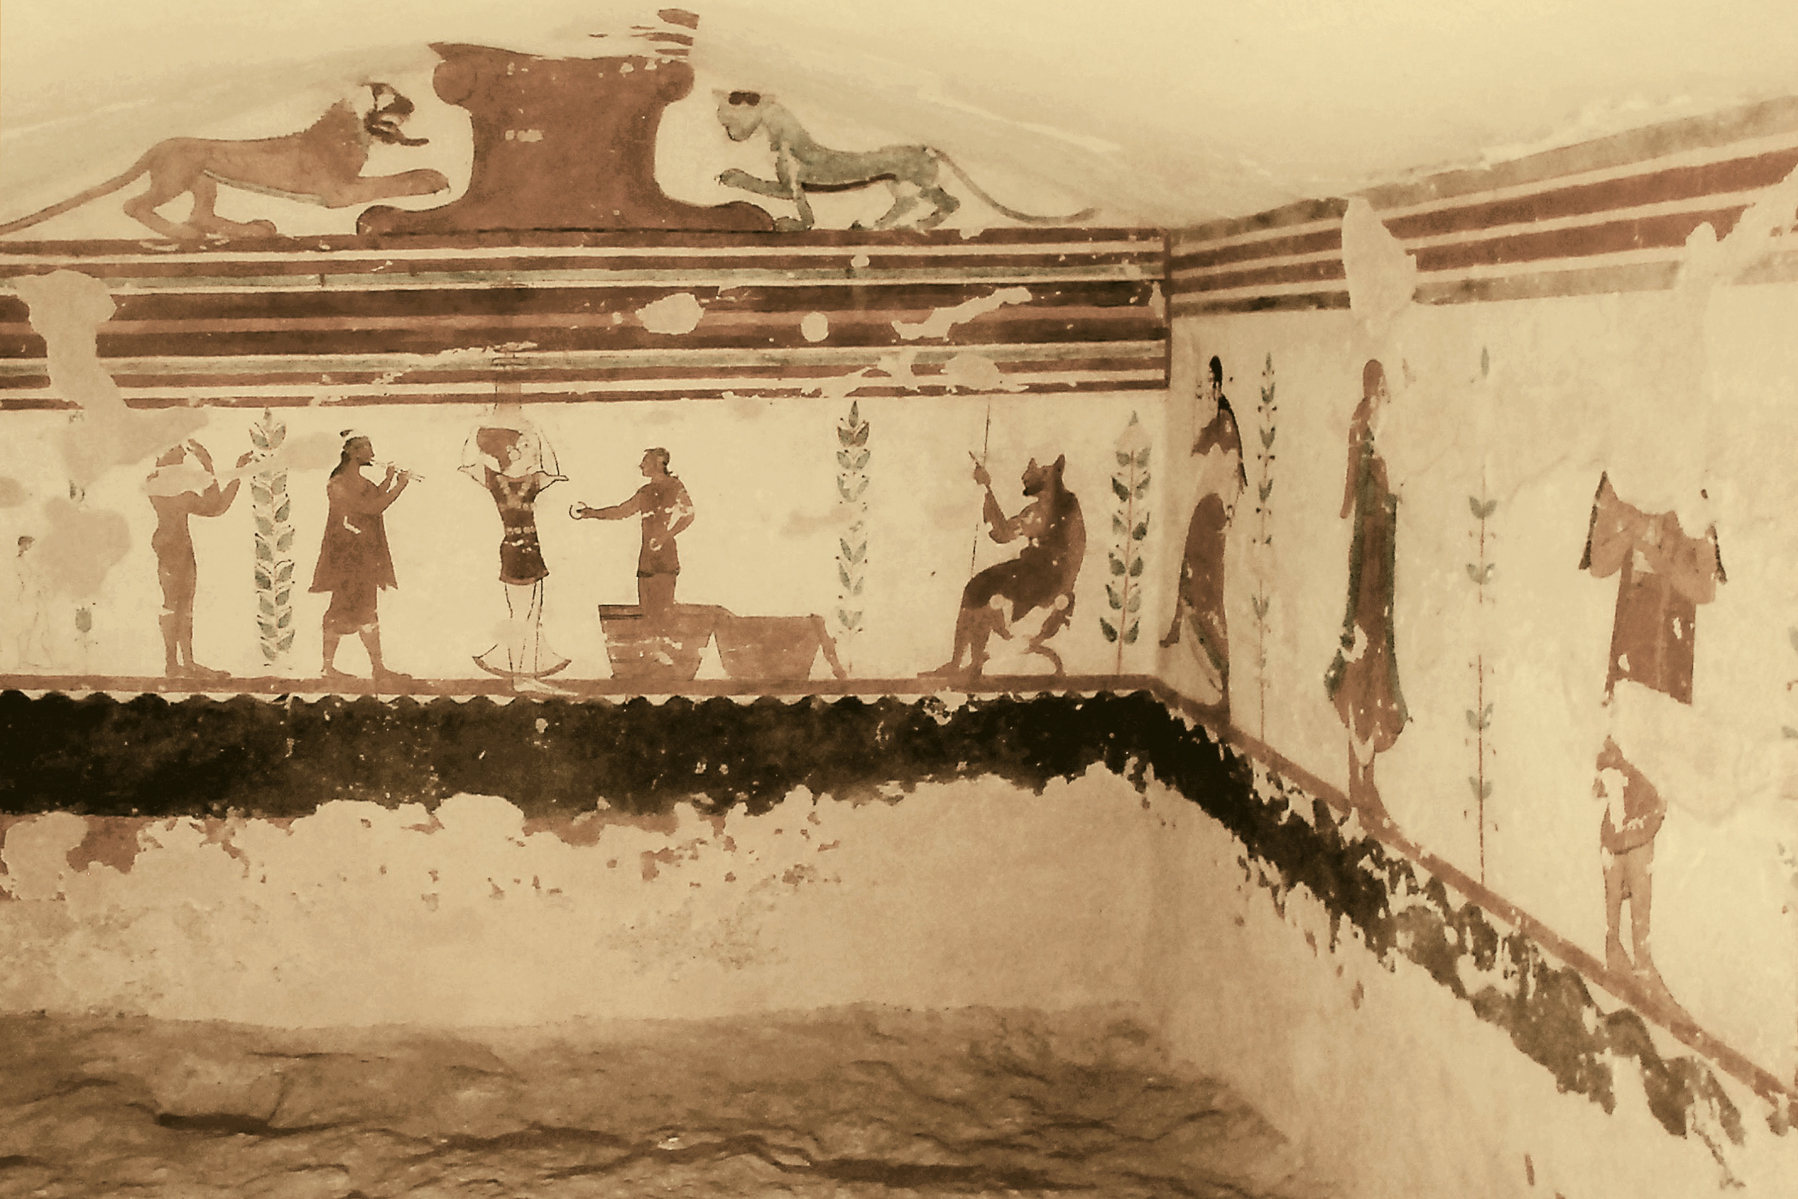 TUSCANIA, ITALY - SEPTEMBER 2, 2006: The picture shows the Tomb of the Jugglers (end of 5th century B.C.), recorded at Tarquinia, Lazio, Italy.